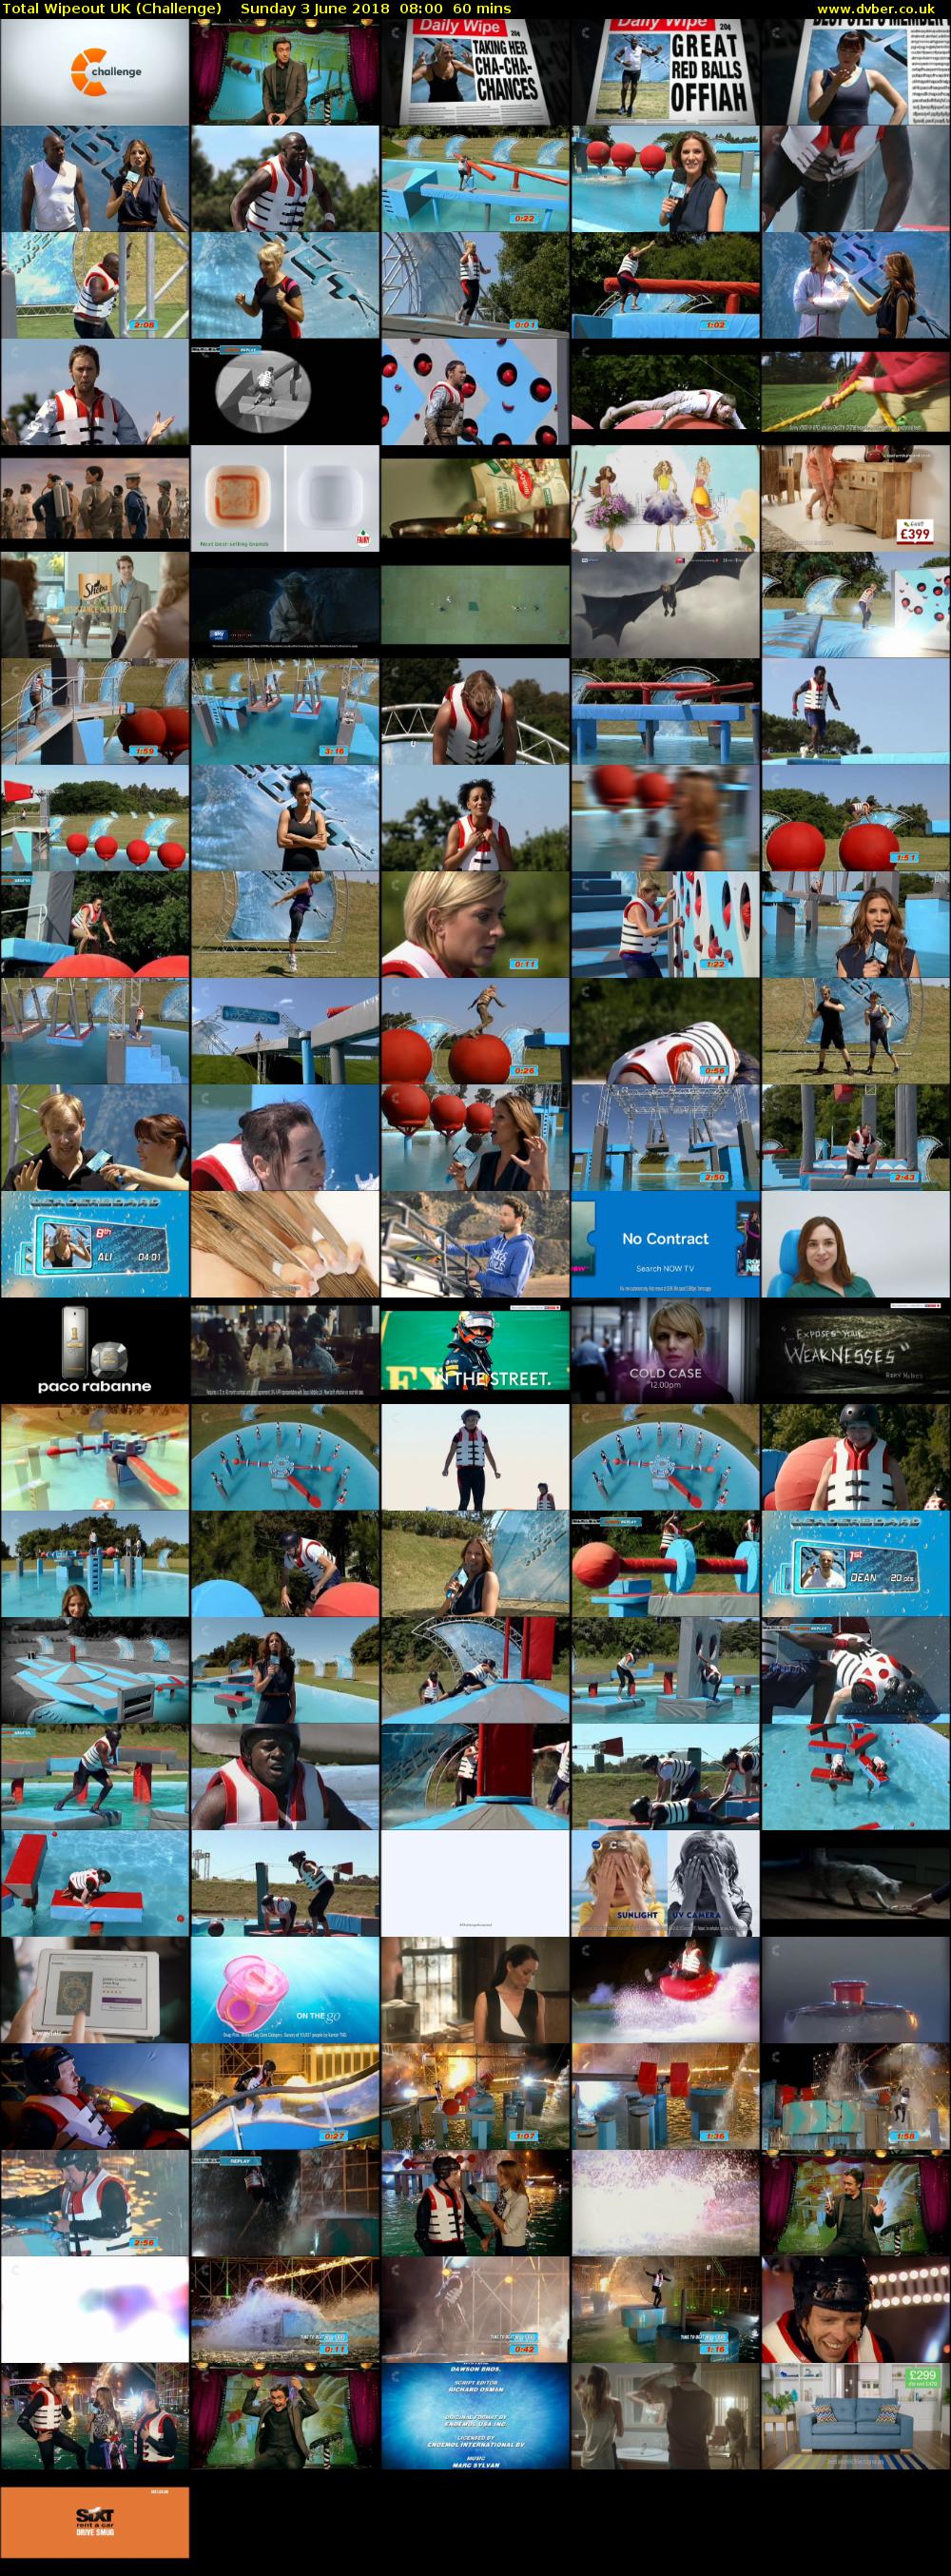 Total Wipeout UK (Challenge) Sunday 3 June 2018 08:00 - 09:00